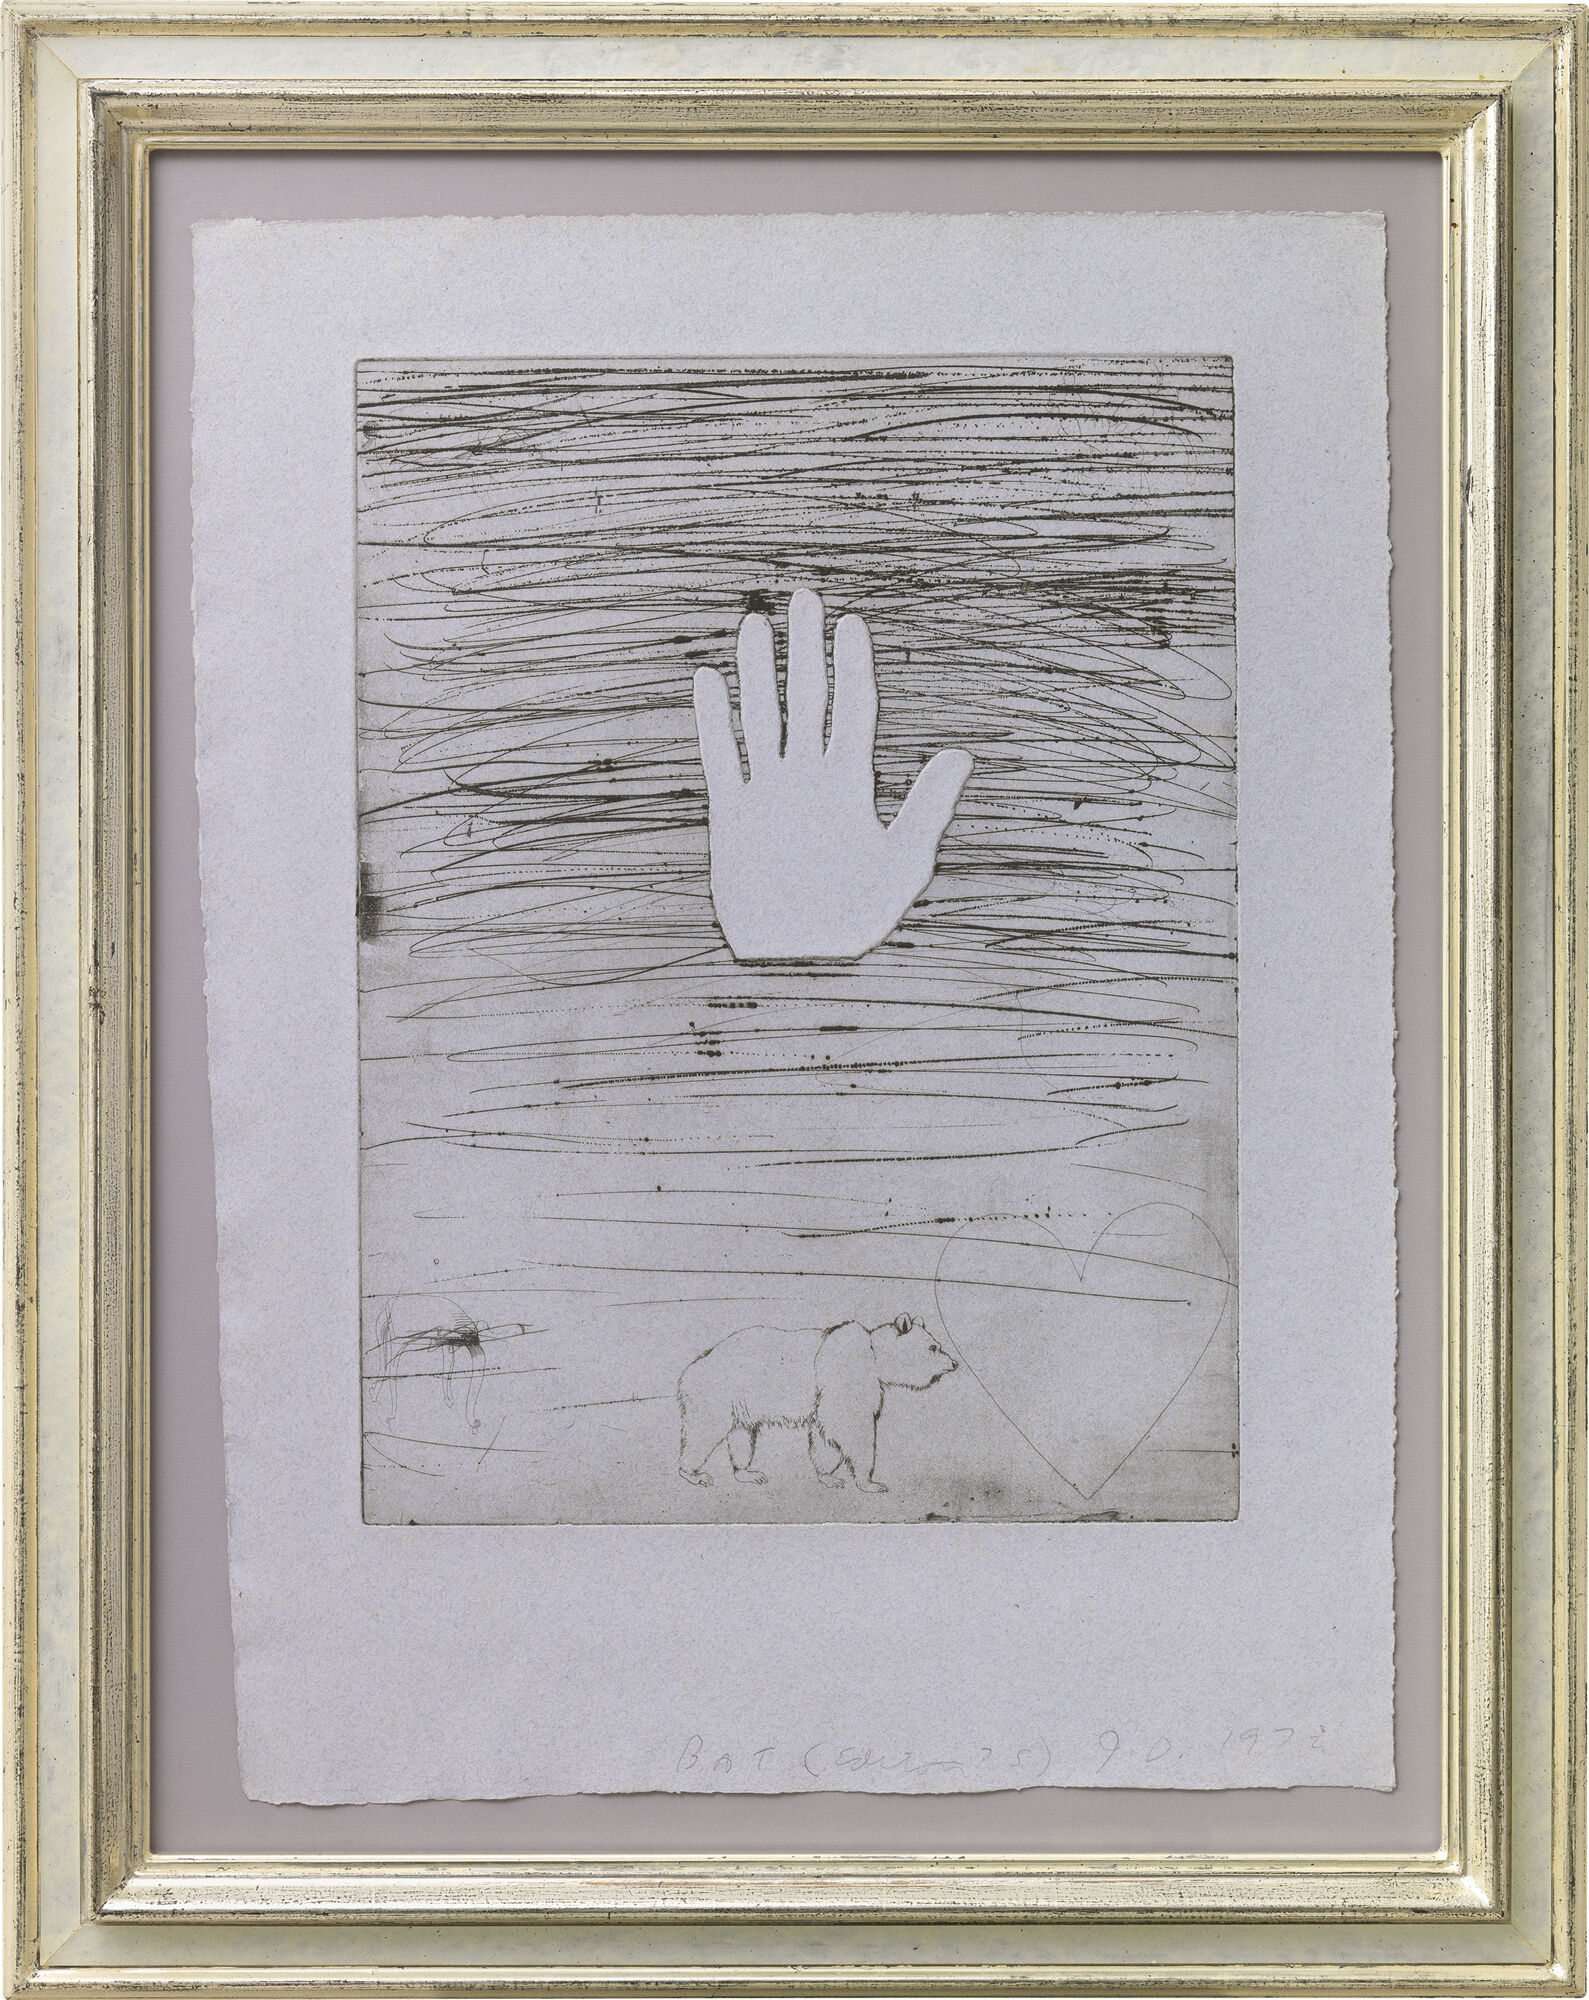 Picture "Hand" (1972) by Jim Dine